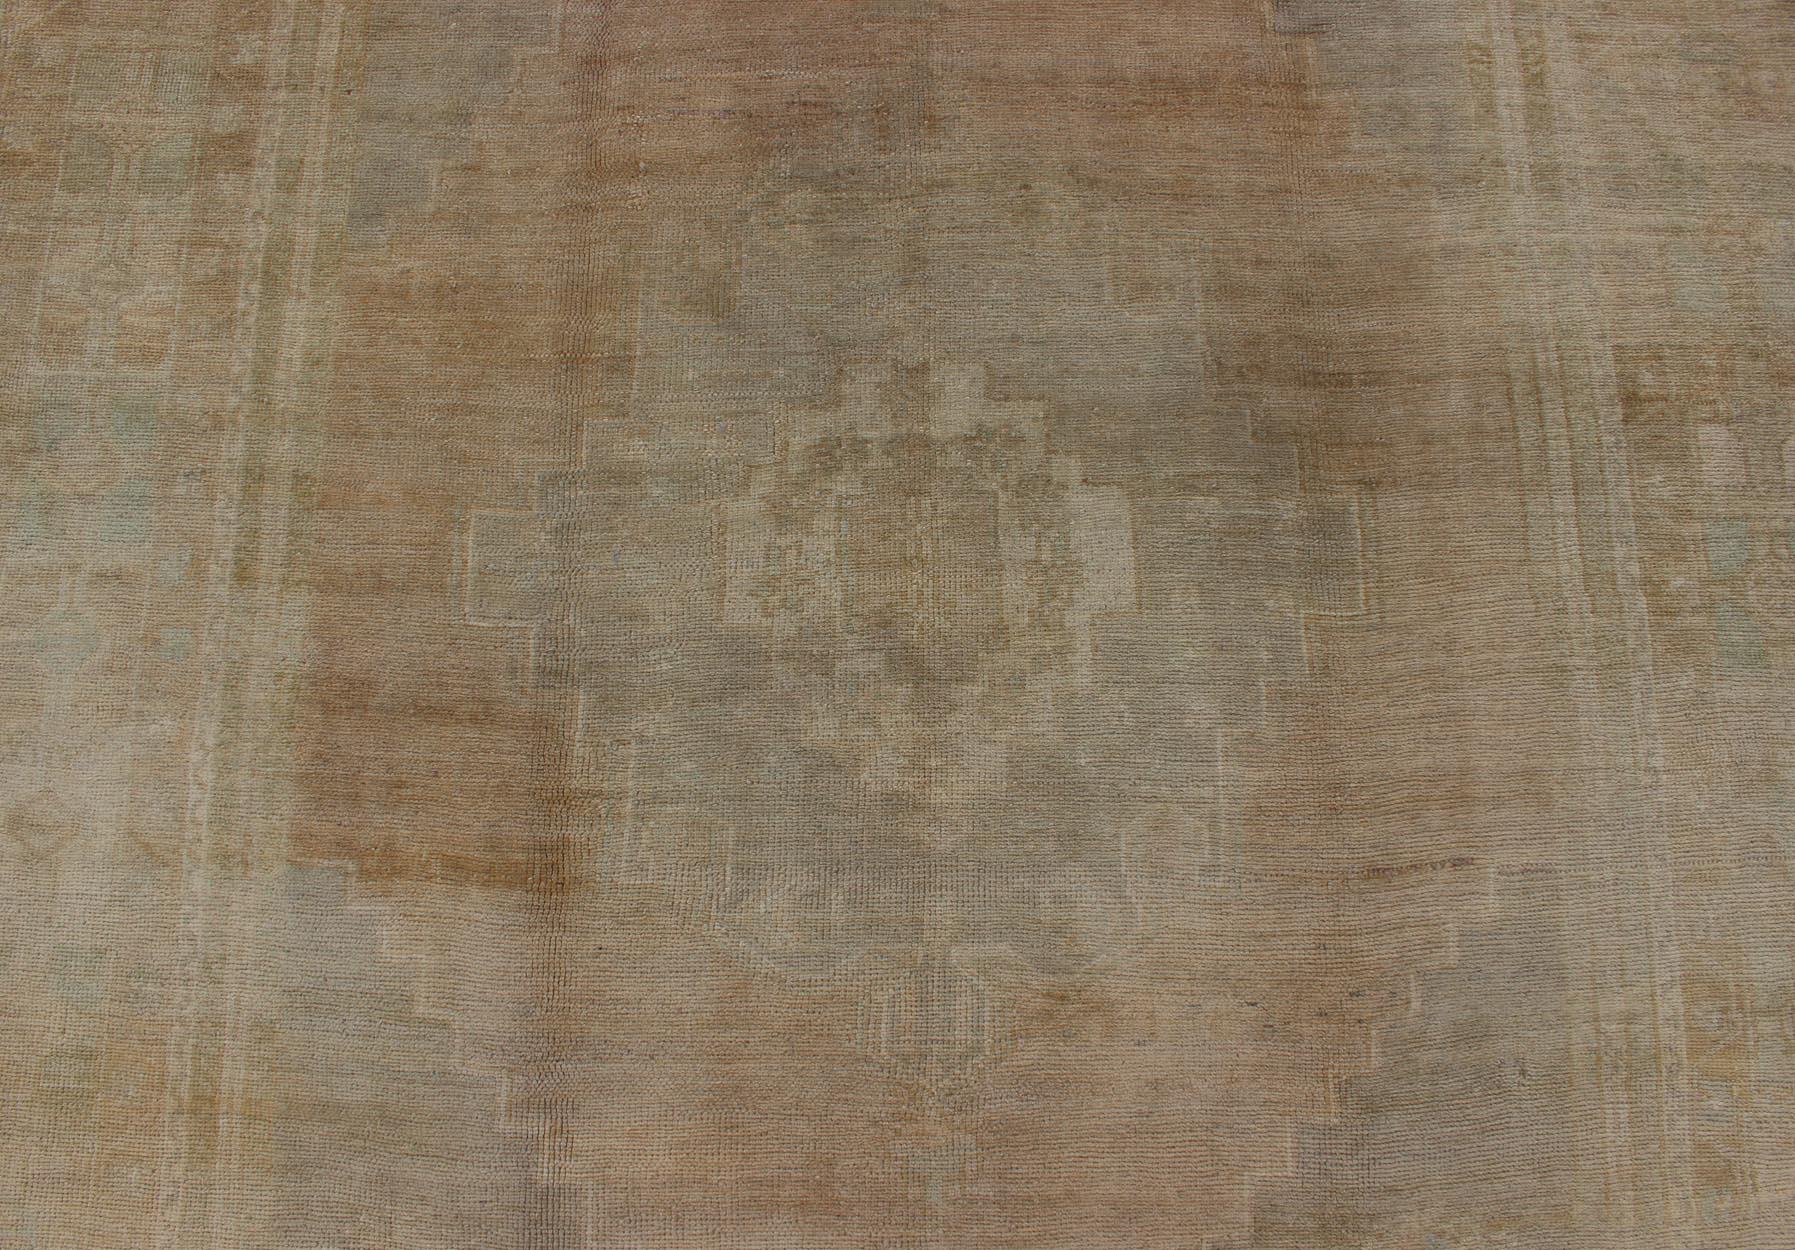 Faded Vintage Turkish Oushak Medallion Rug in Taupe, Tan, Gray 7